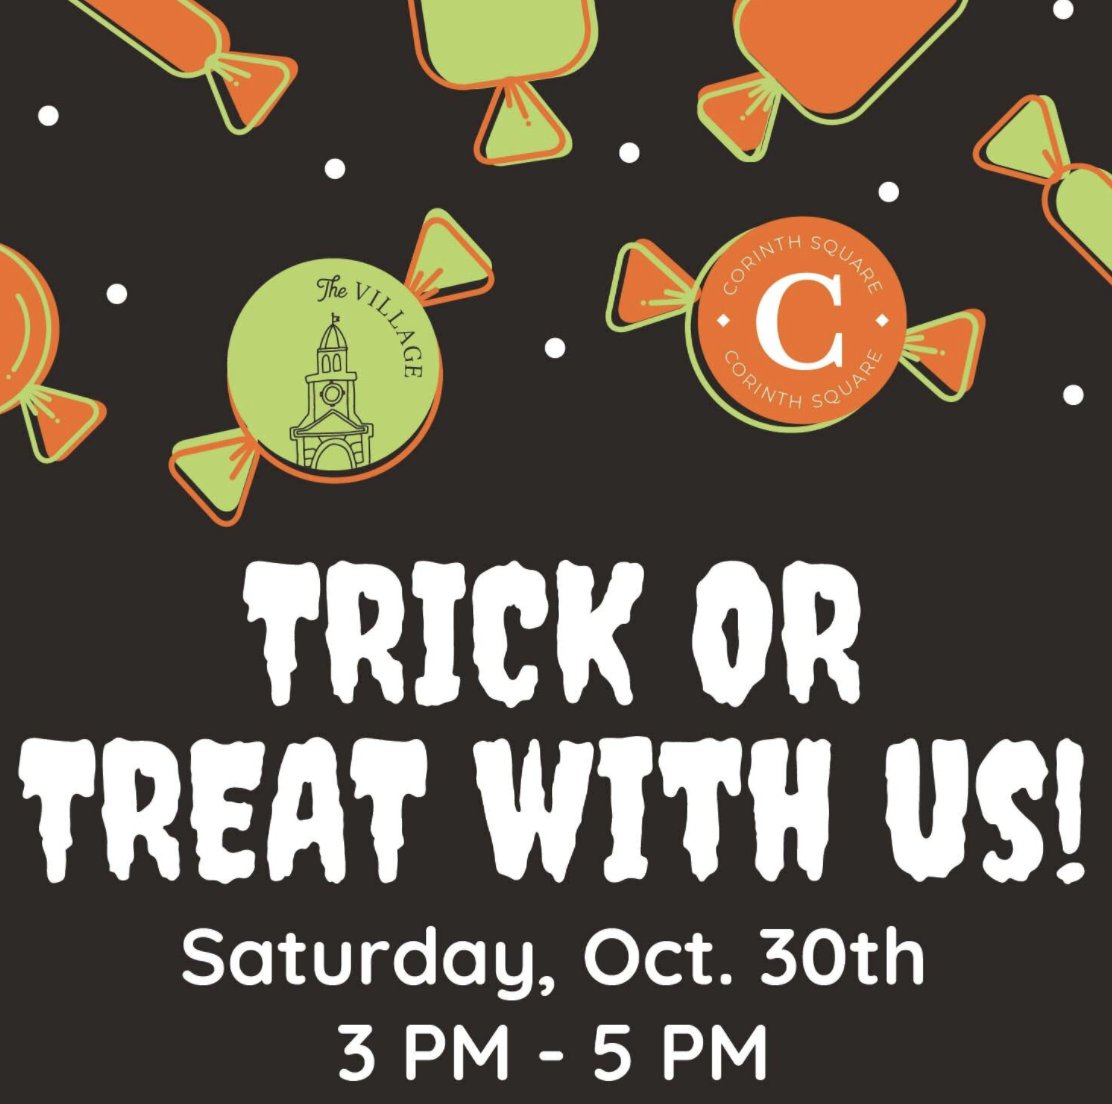 Trick or Treat at The Shops of Prairie Village and Corinth Square KC